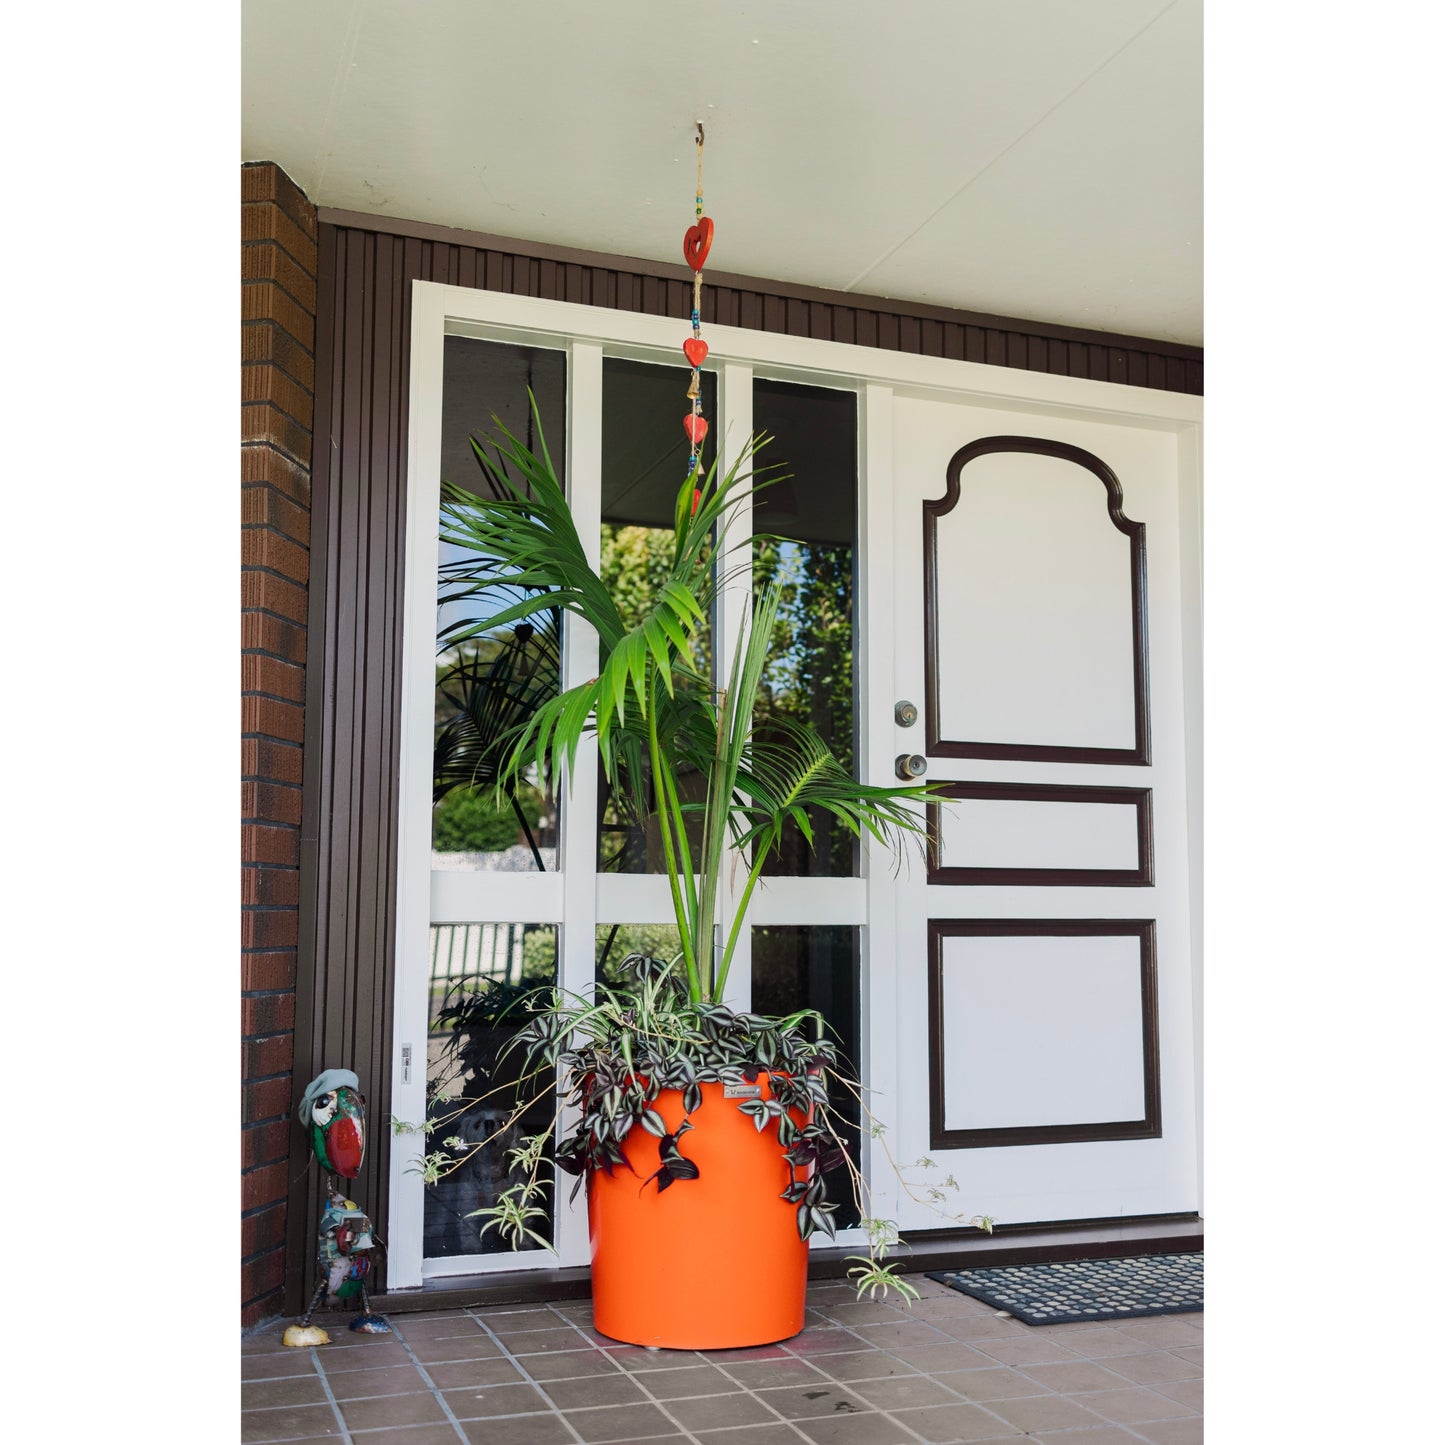 Orange Modscene planter pot by a front door. The planter is bright orange and has a palm in it.